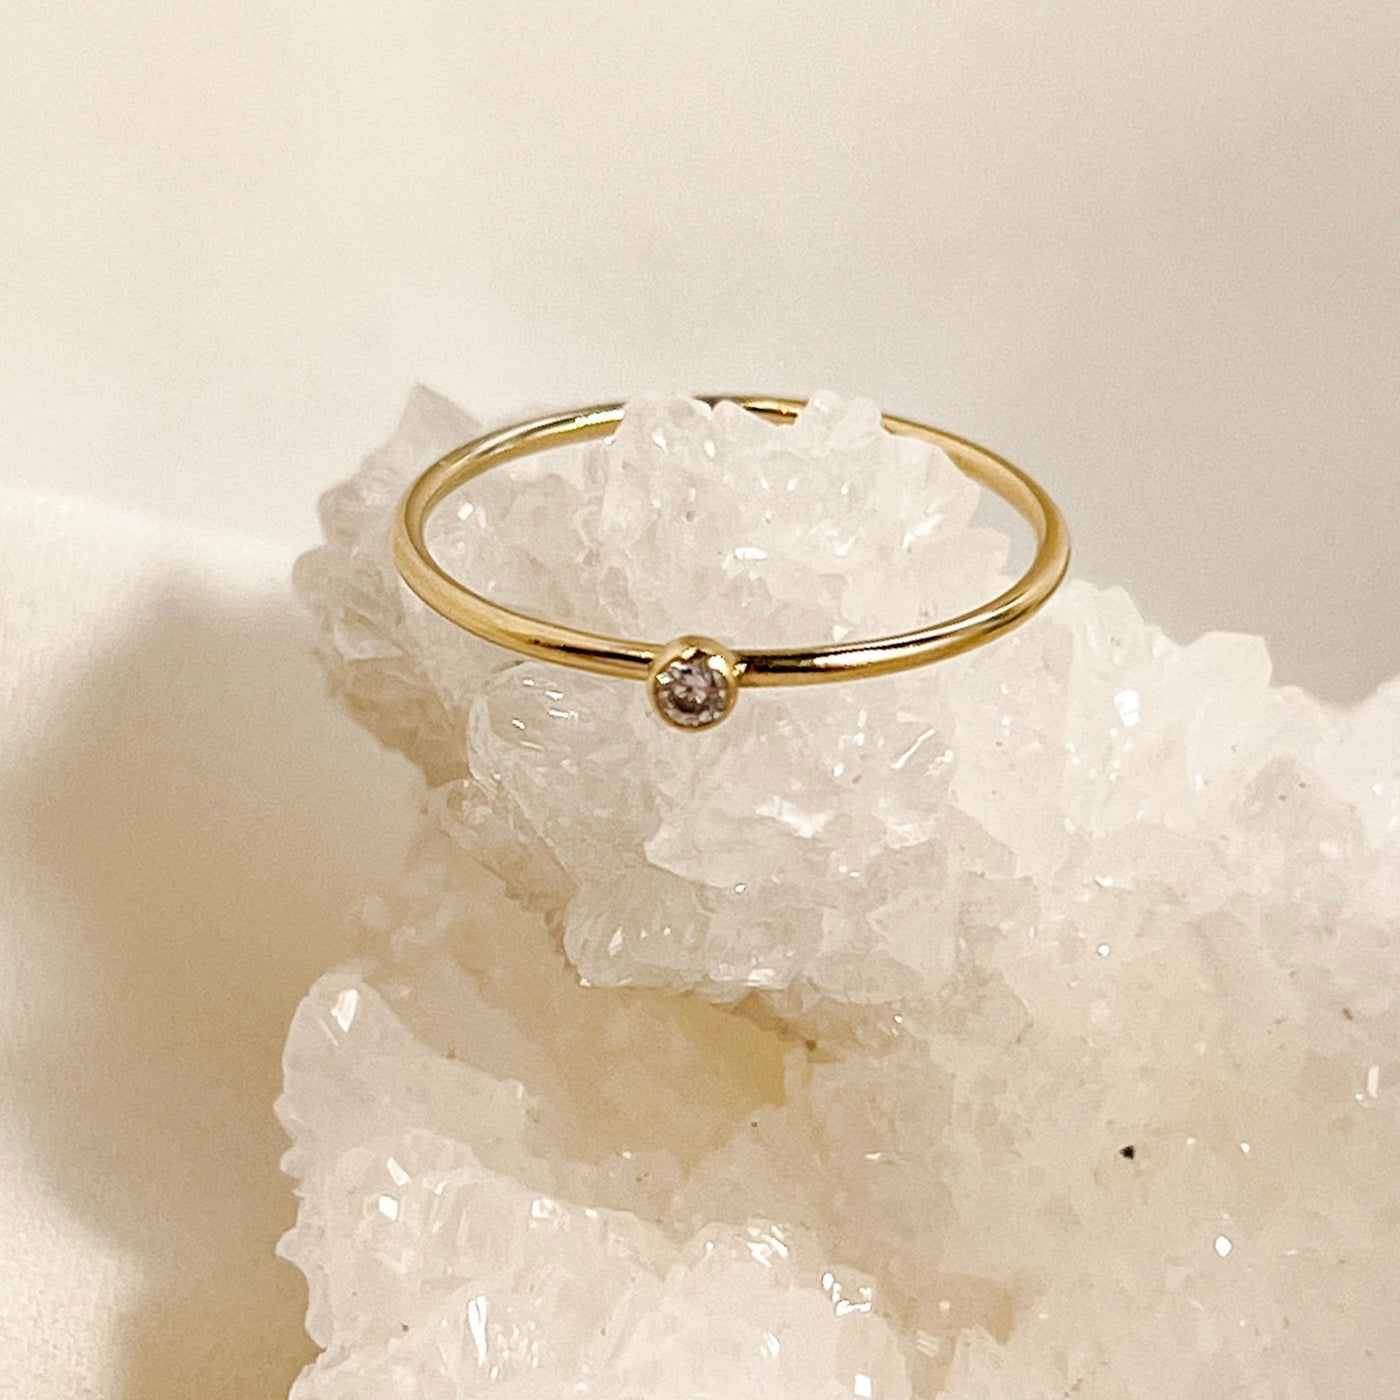 14K gold filled band ring with a 2mm white faceted cubic zirconia accent stone displayed on white sparkly crystal geode